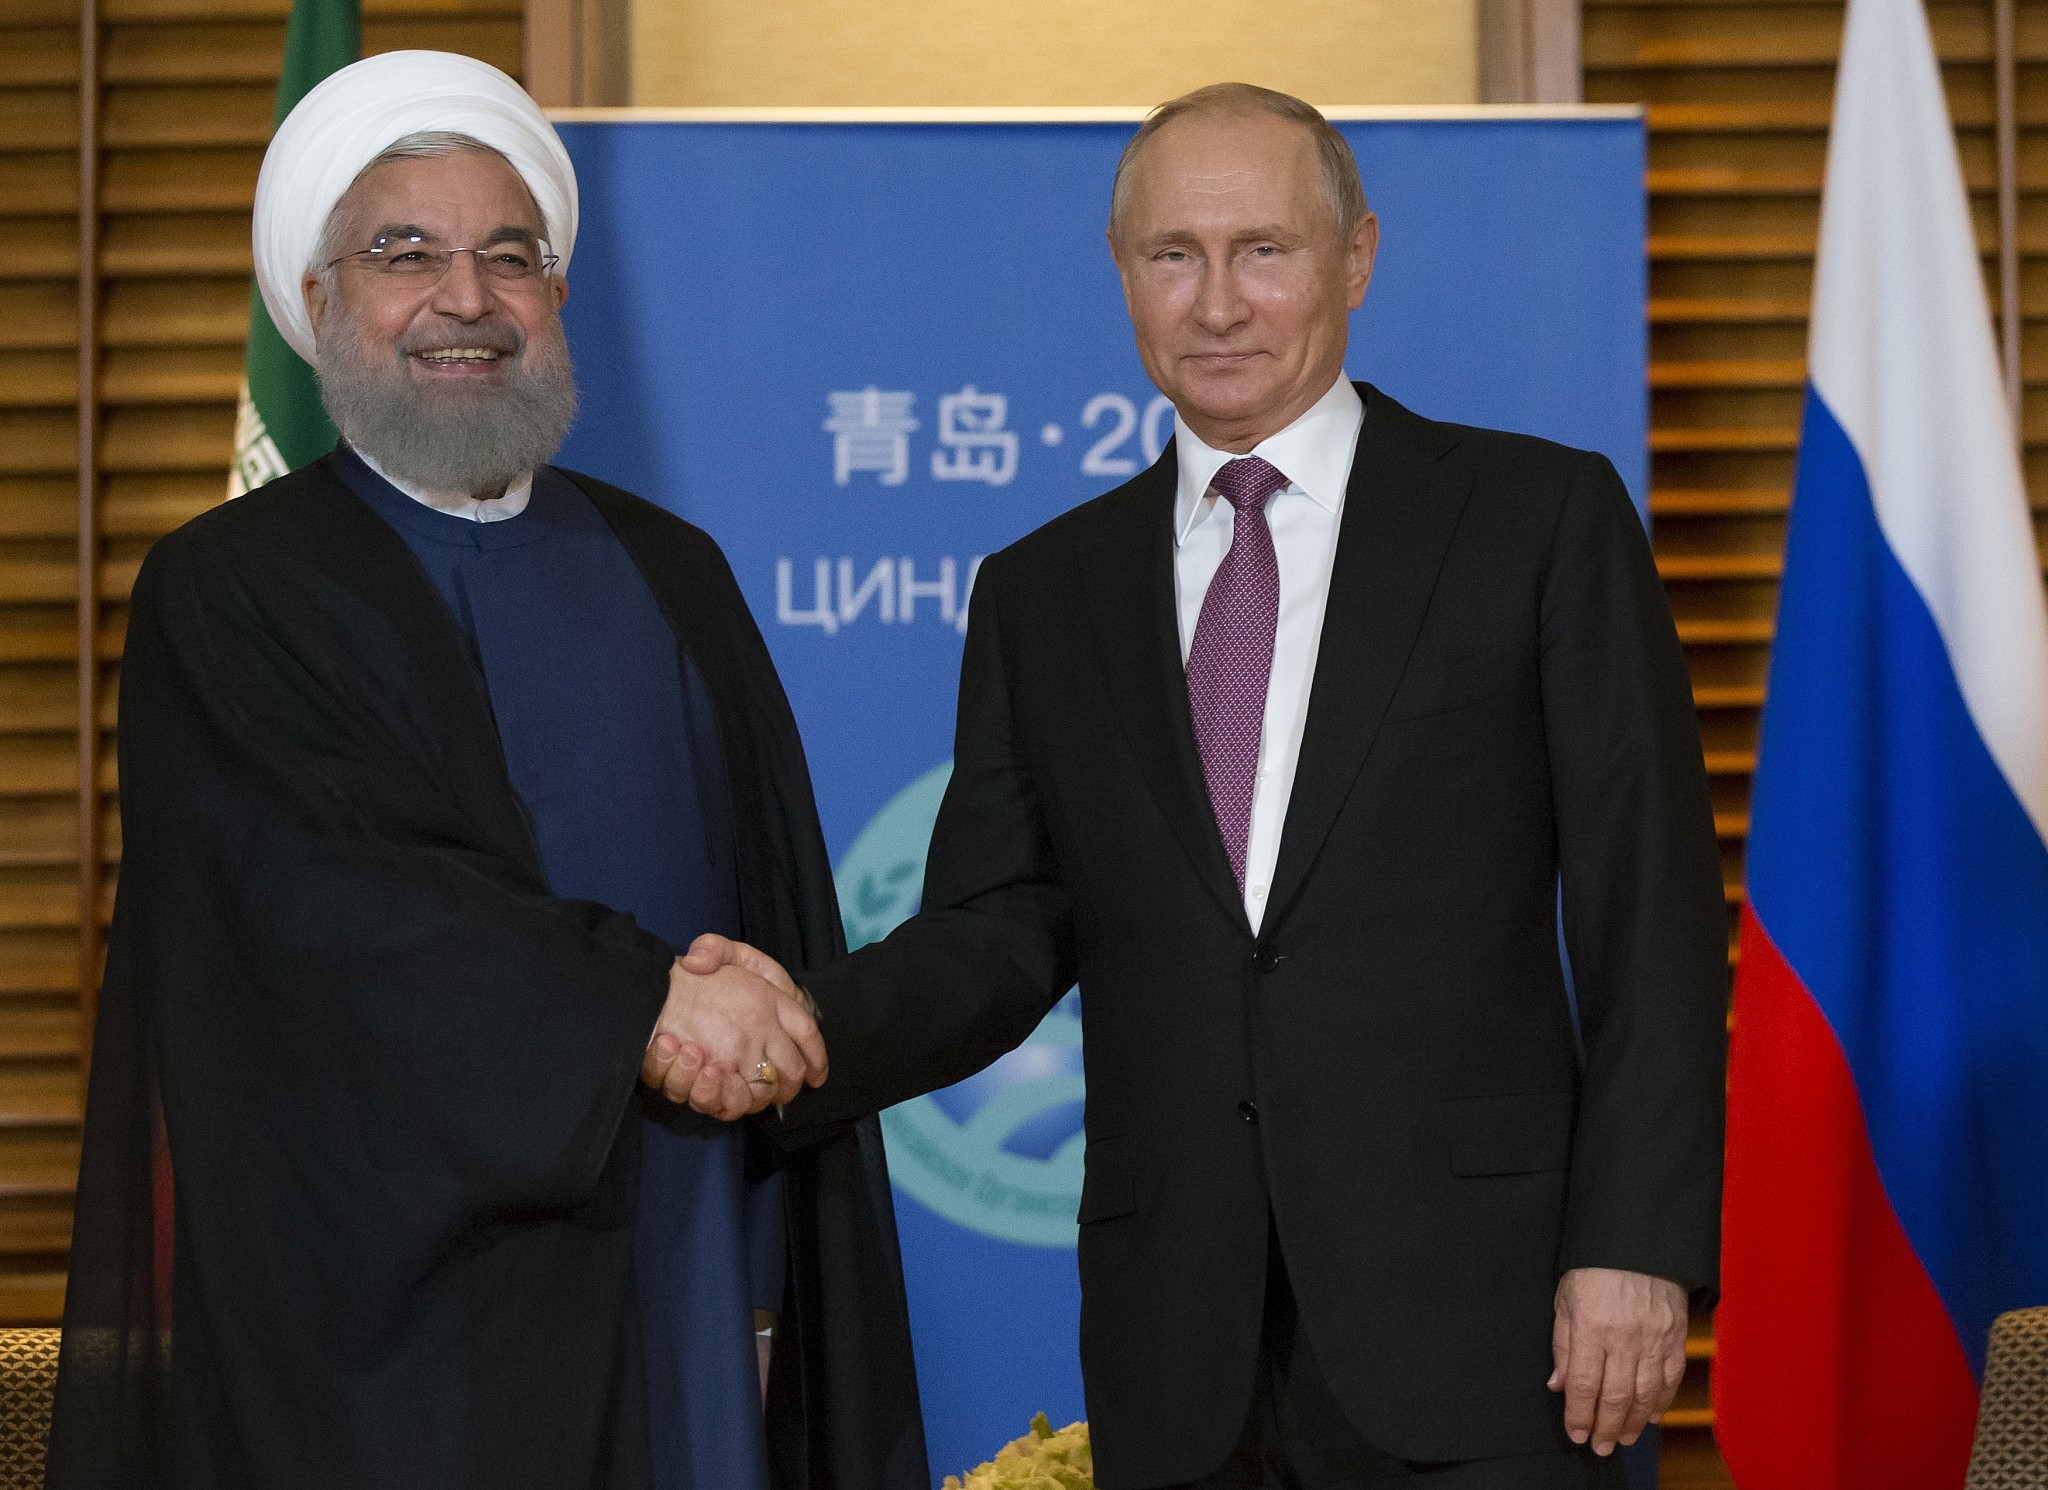 Rouhani and Putin discuss US exit from nuclear deal | The Times of Israel